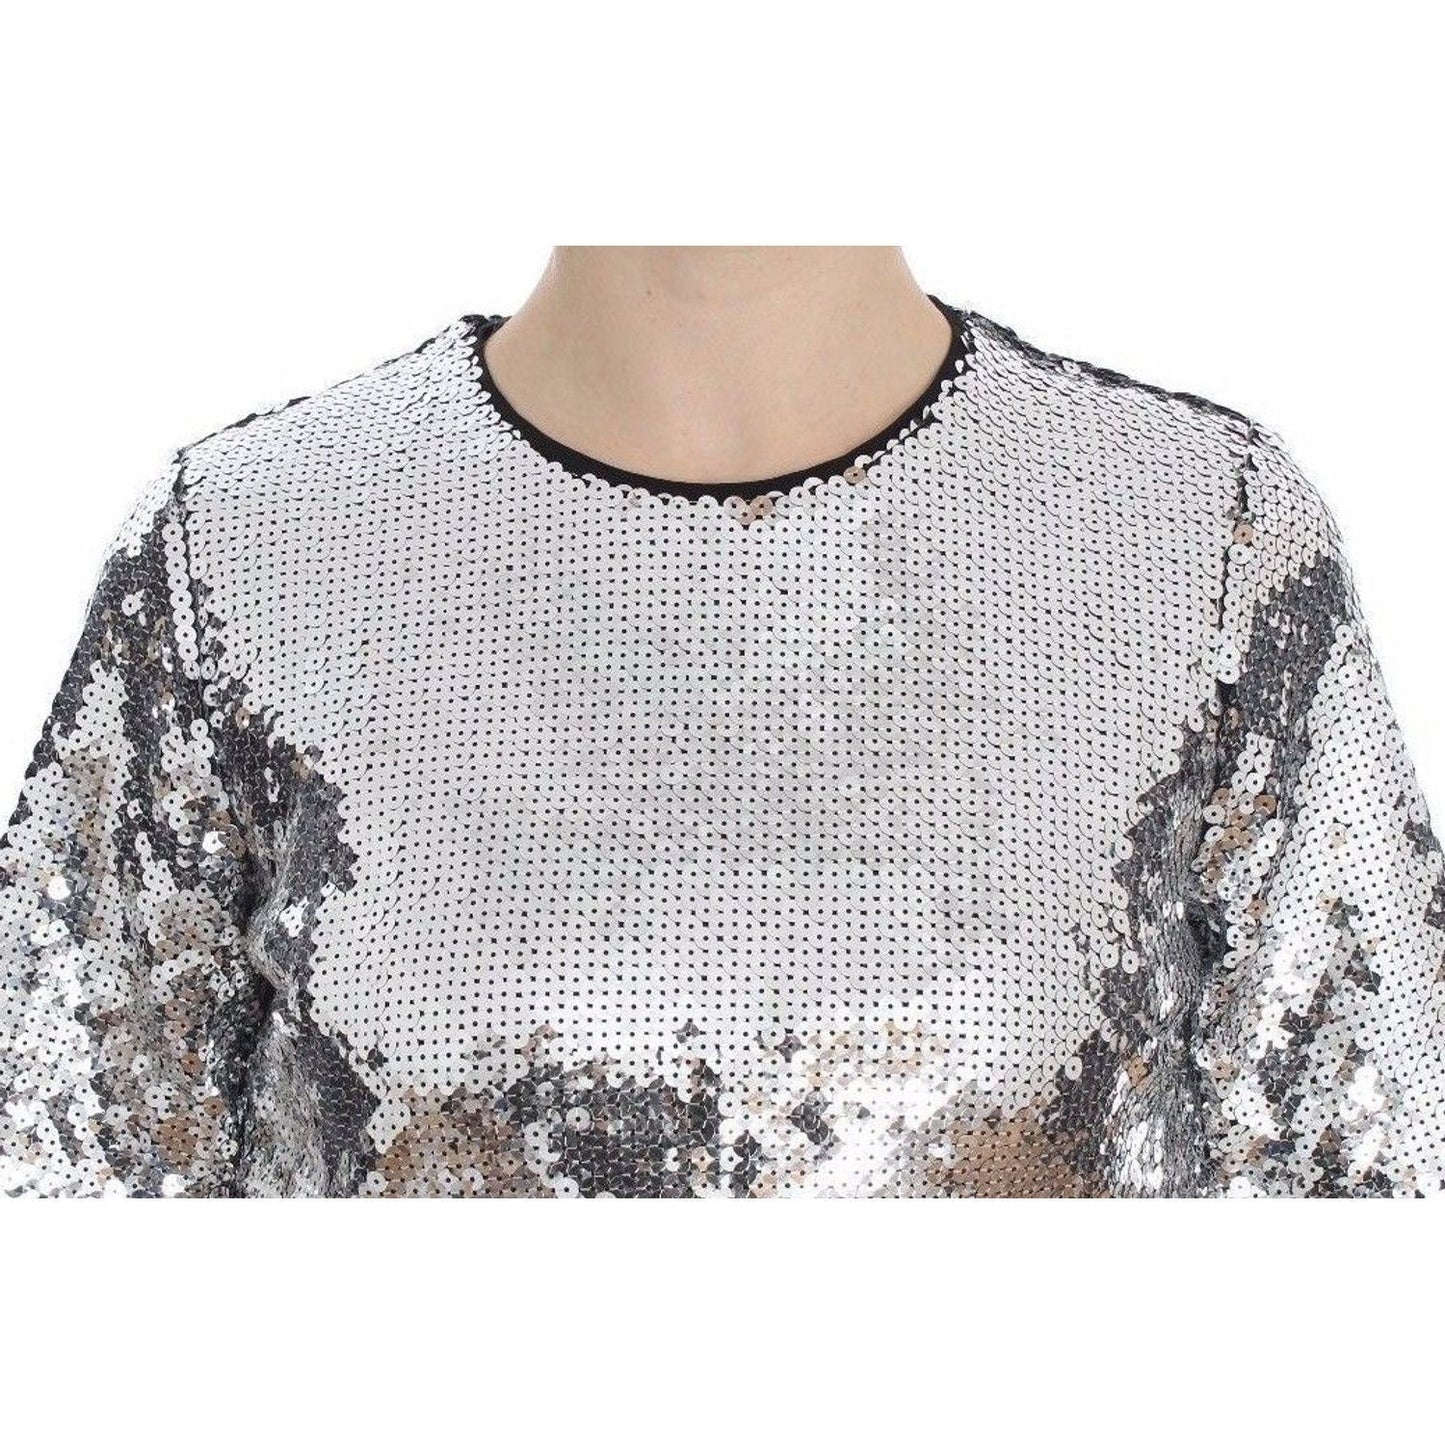 Dolce & Gabbana Sequined Elegance Blouse silver-sequined-crewneck-blouse-t-shirt-top-1 s-l1600-77-1225c3f5-808.jpg